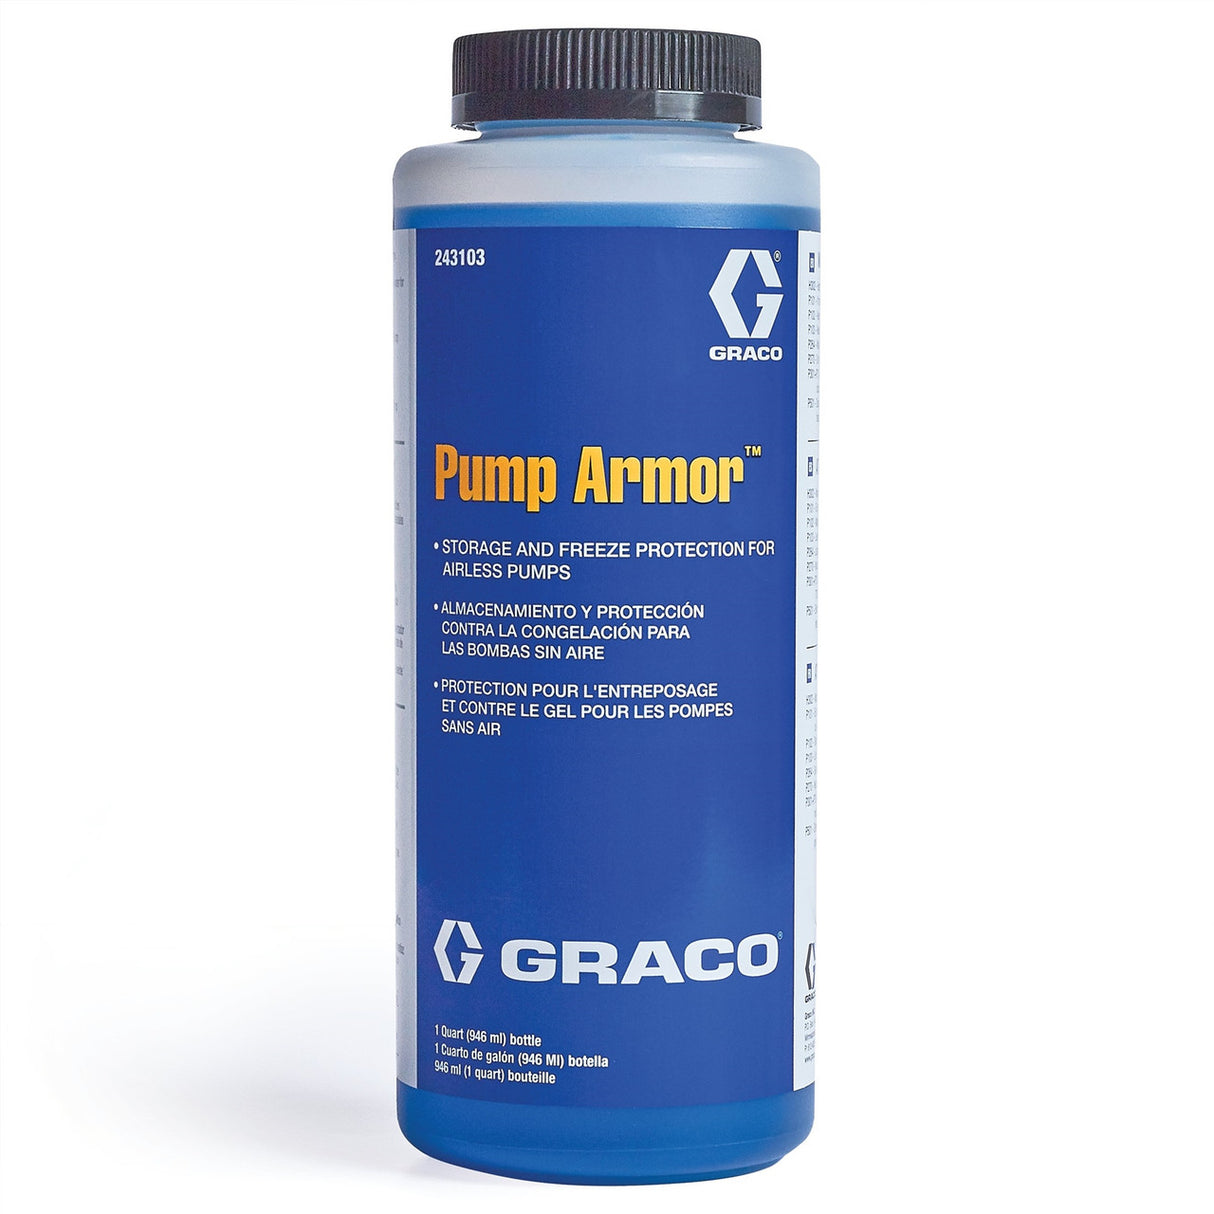 Graco Pump Armor - Protecting Your Investment